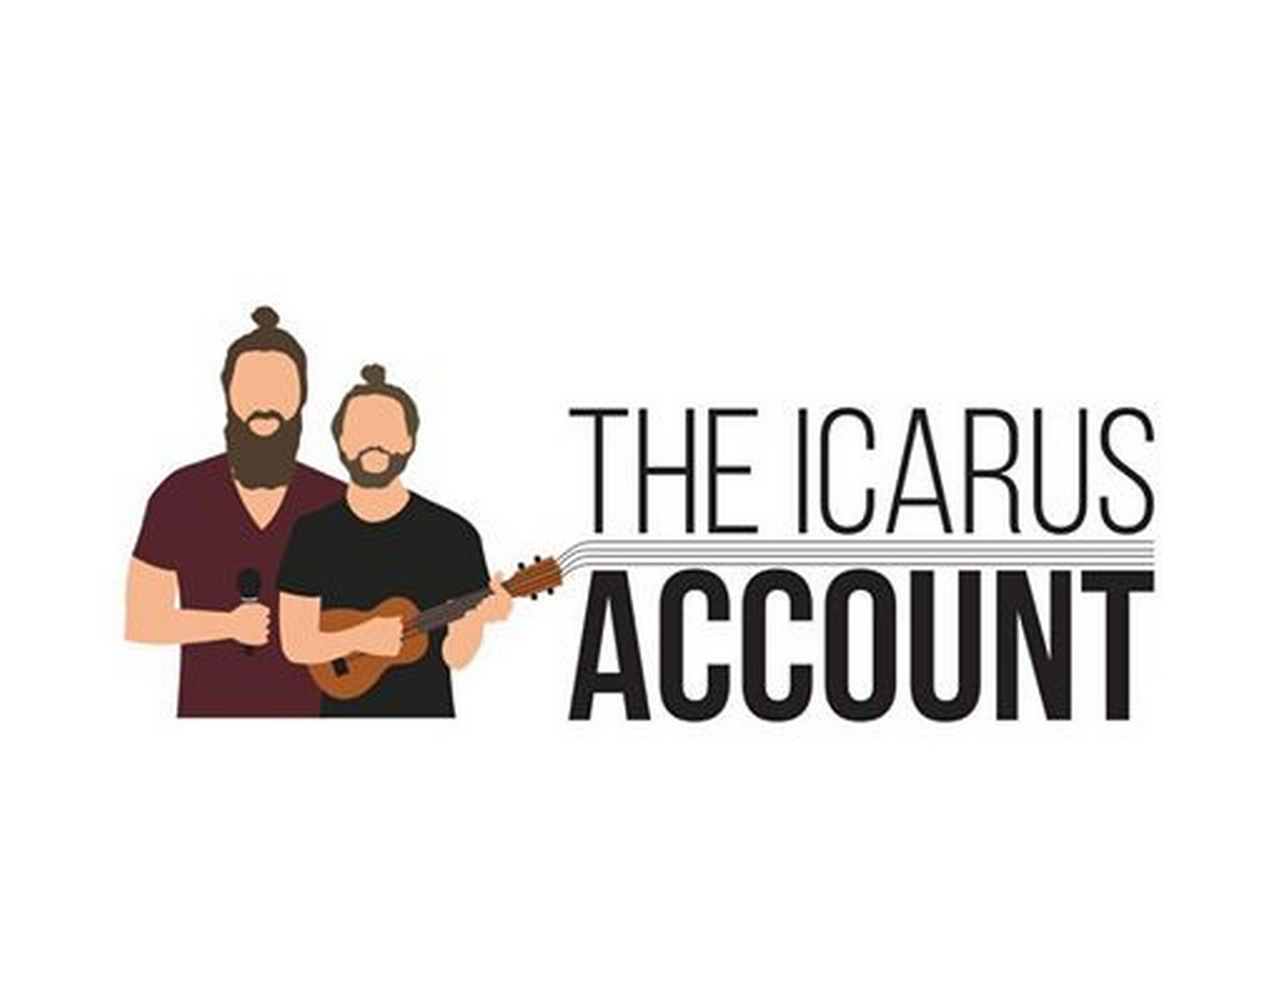 Icarus Account Concert image